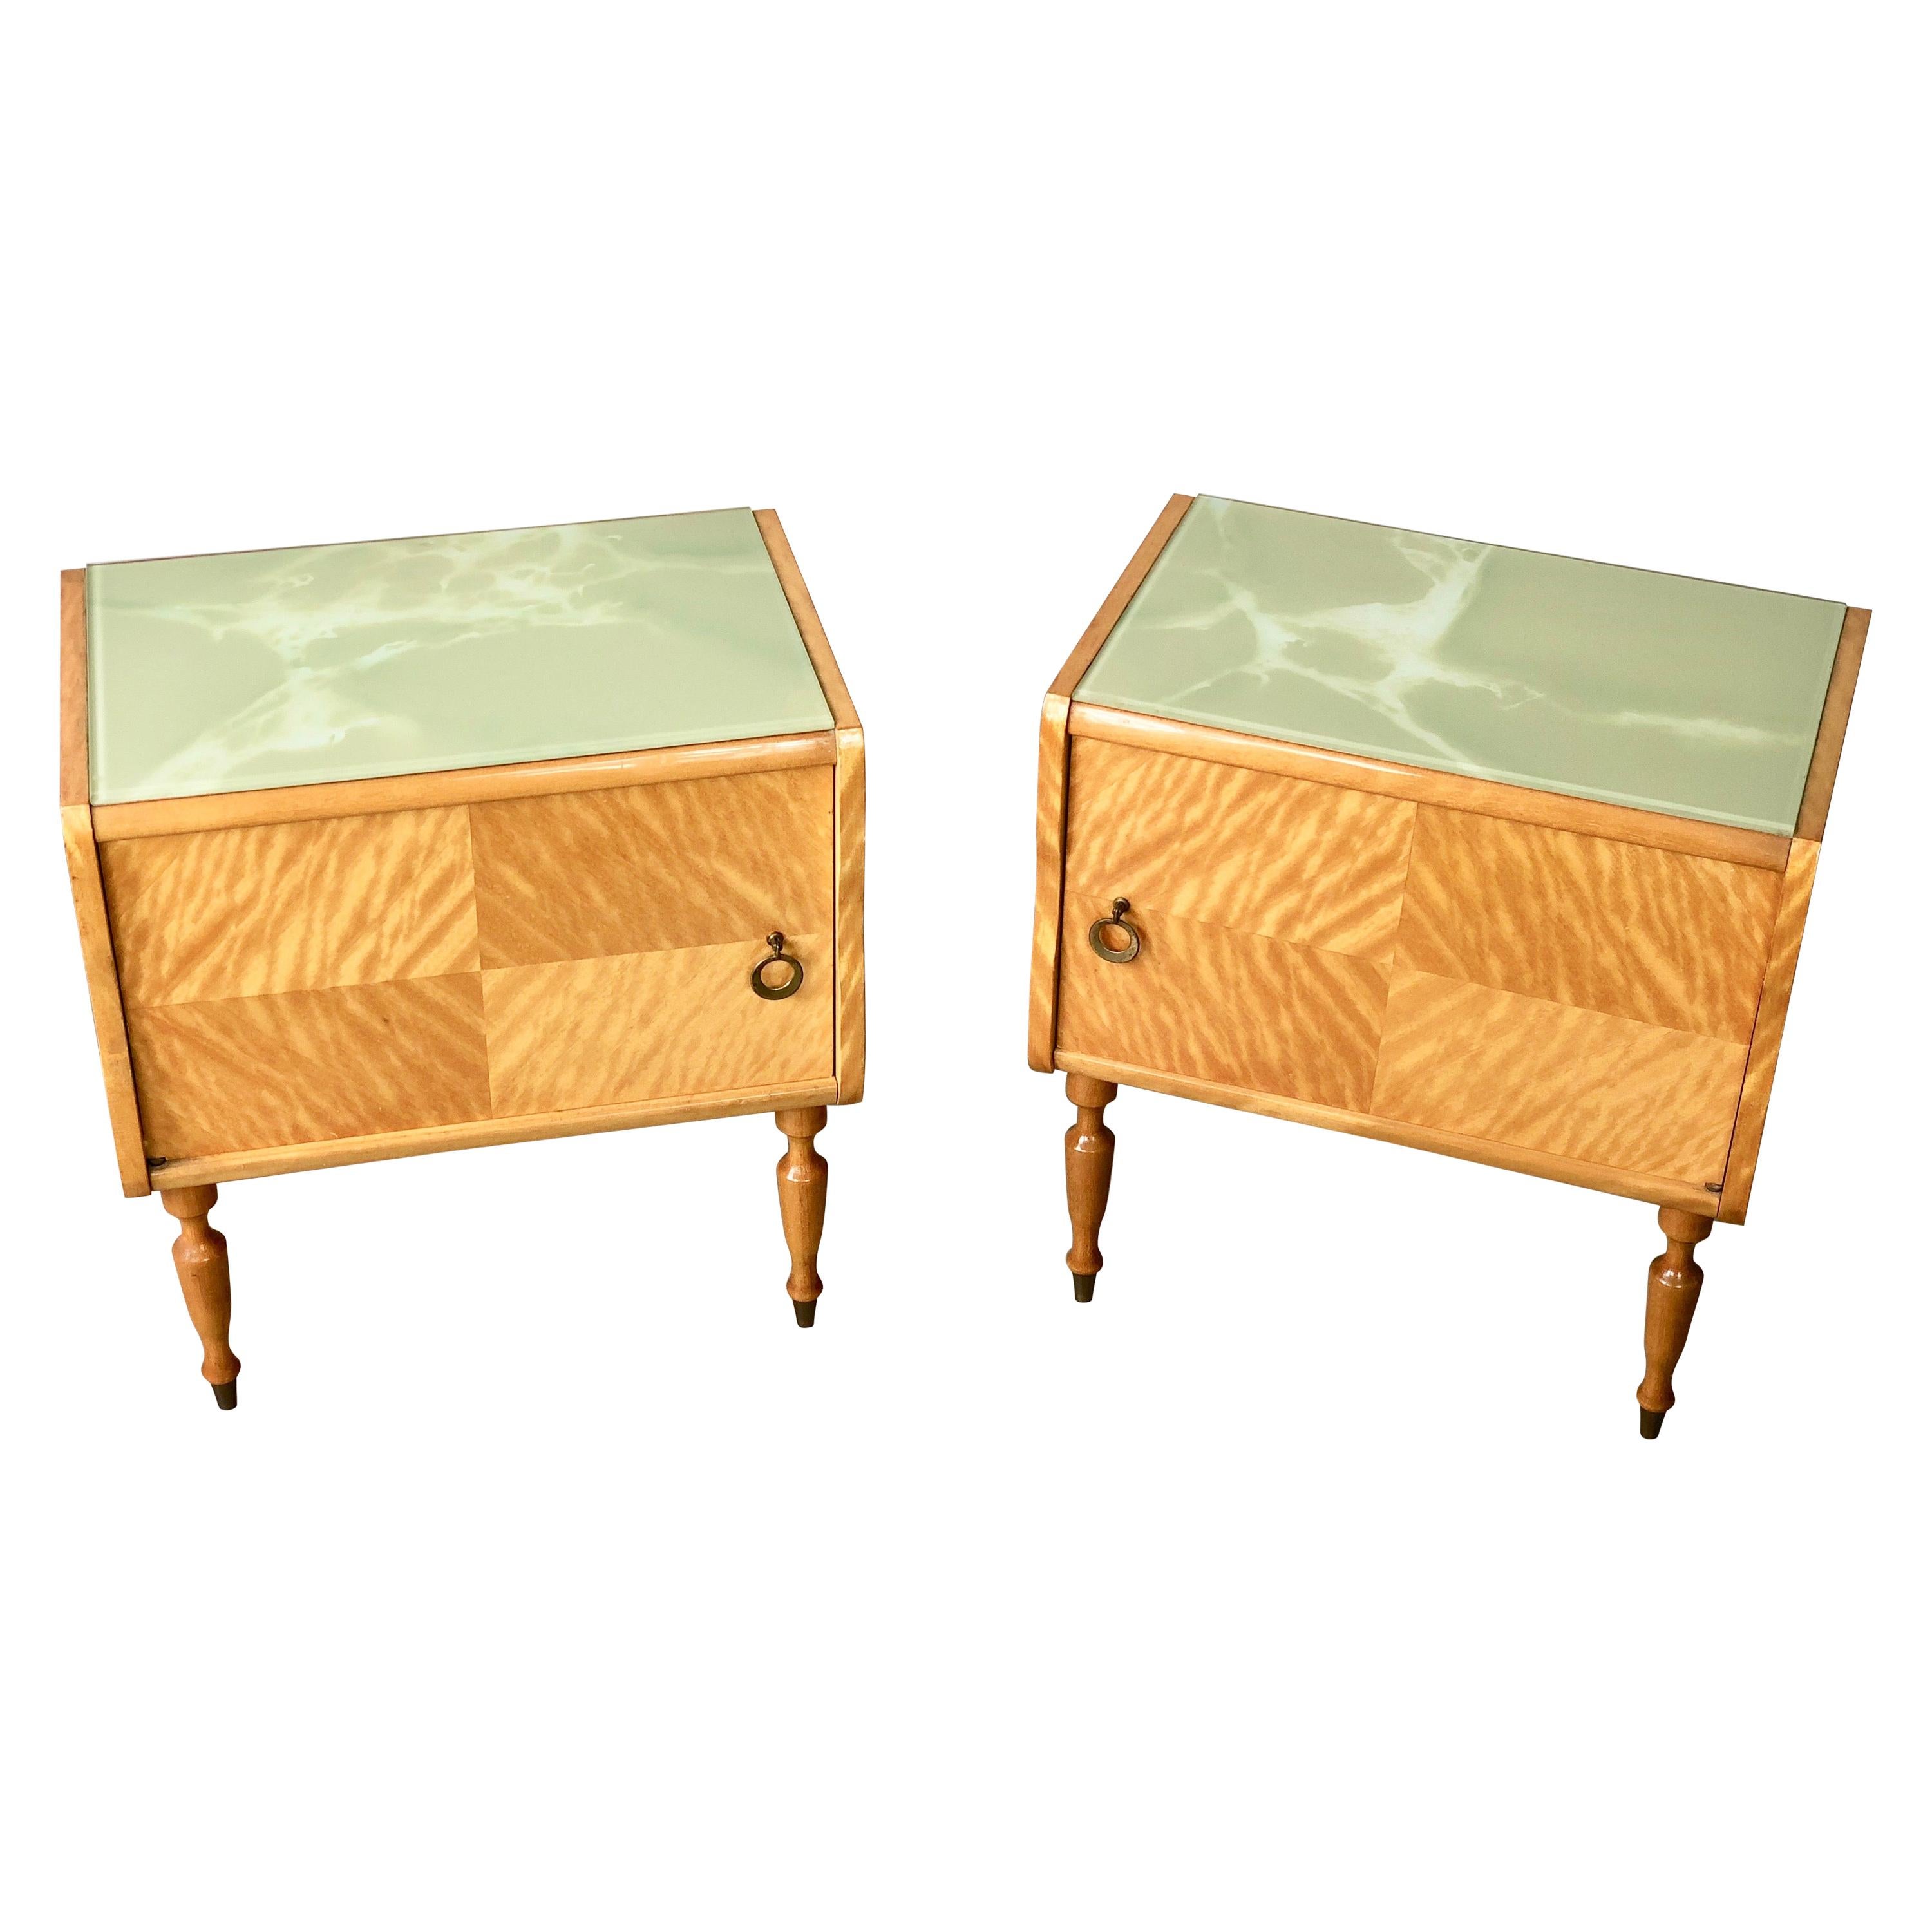 Pair of Wood Lacquered Side Table Nightstands Vittorio Dassi style, 1950s, Italy